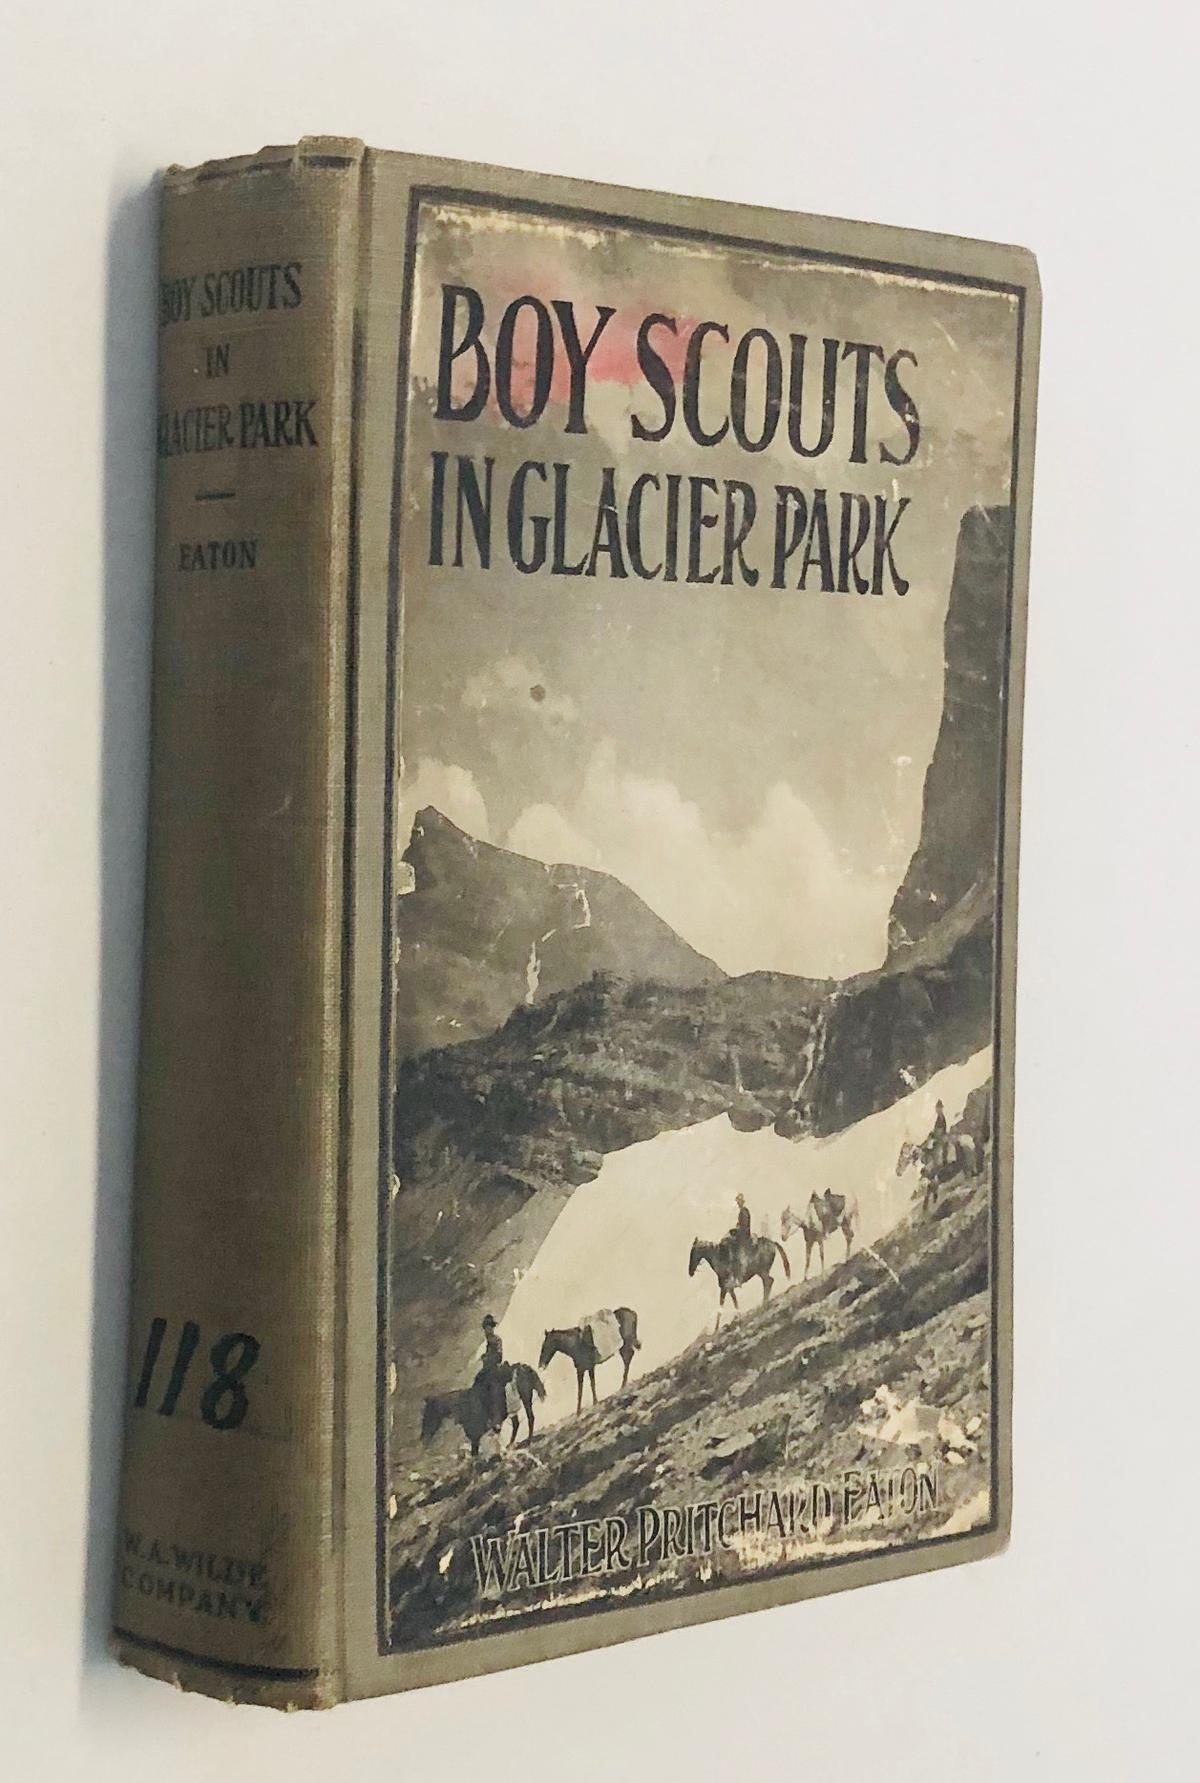 BOY SCOUTS In Glacier Park The Adventures of Two Young Easterners (c.1910)